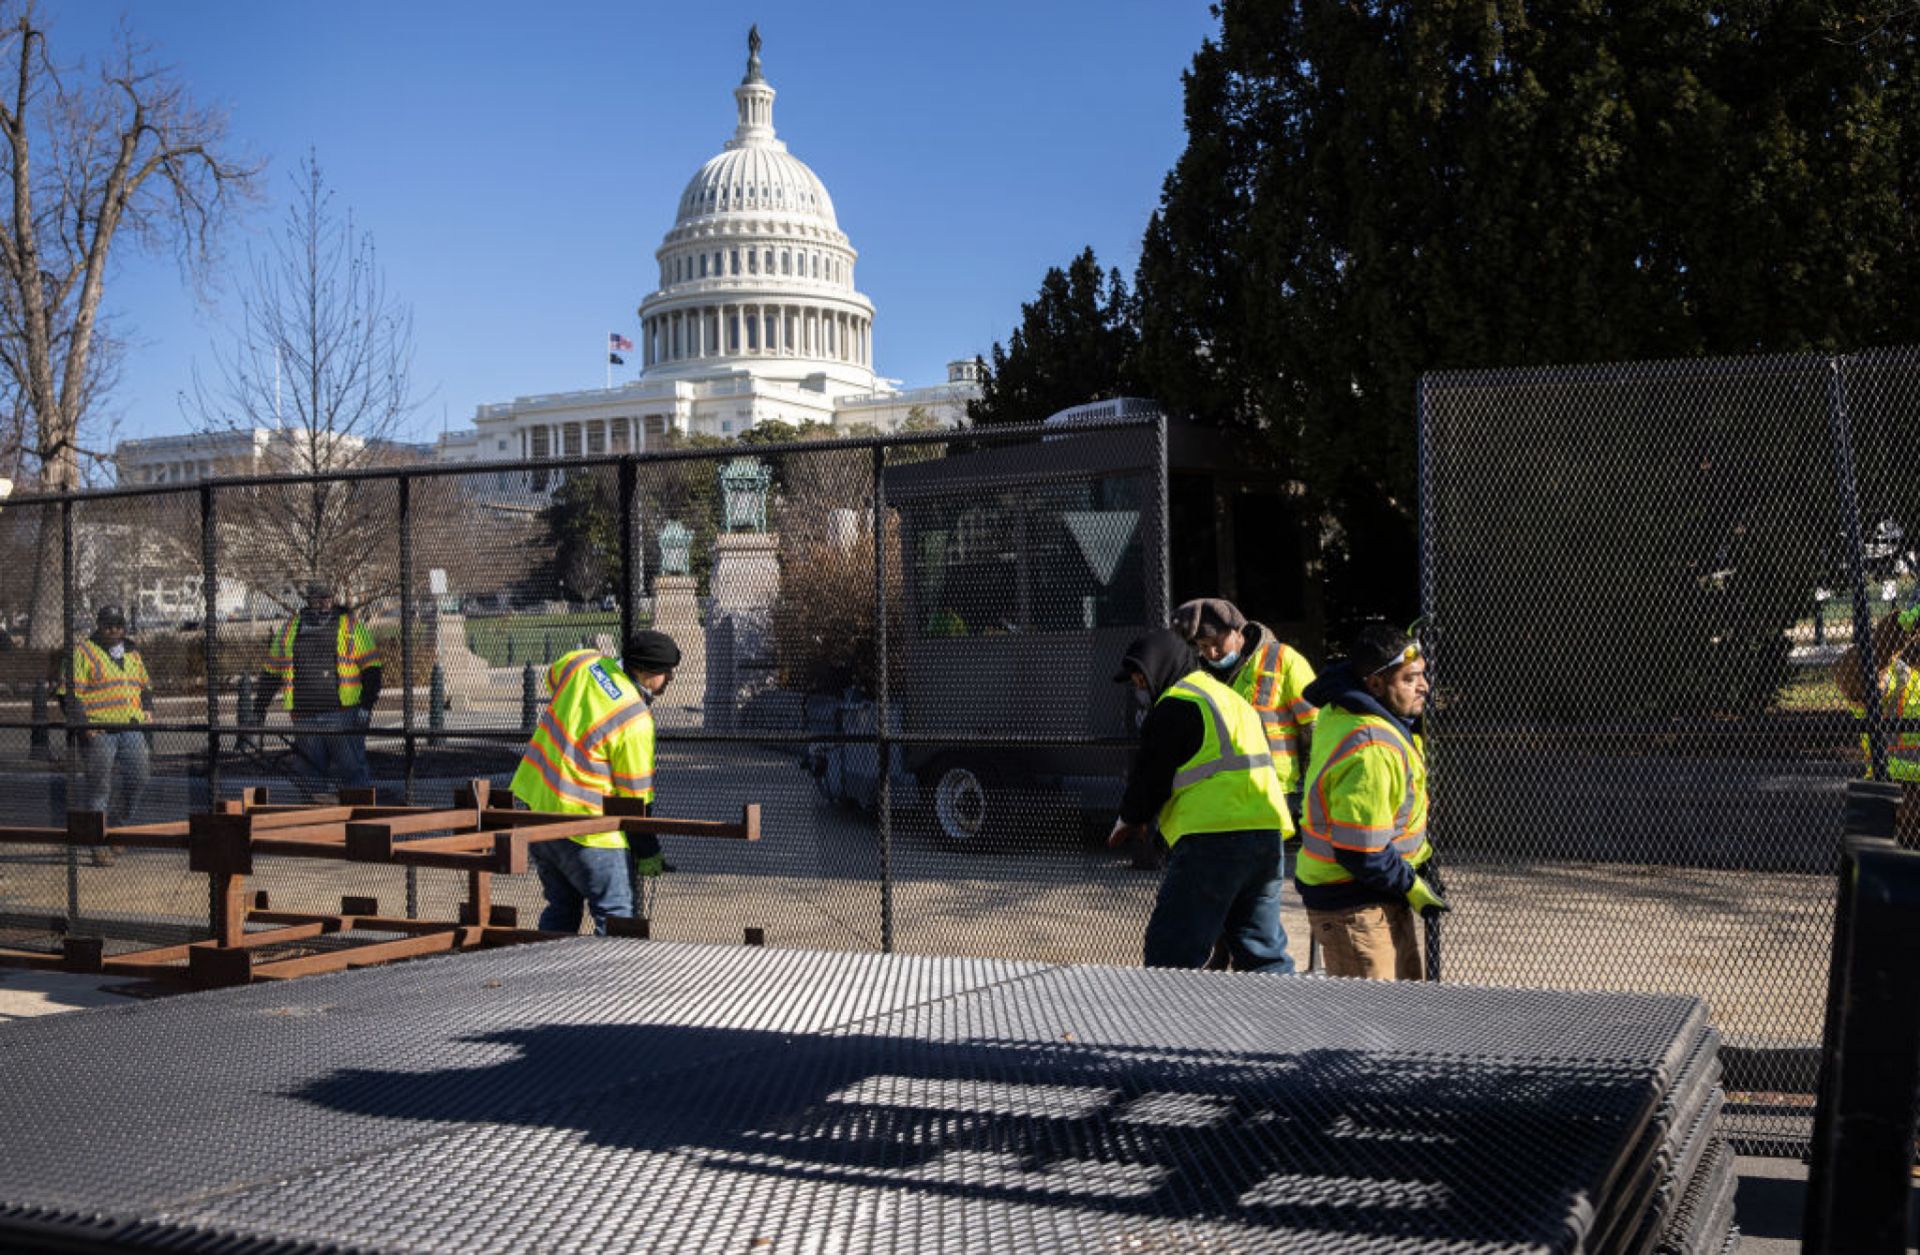 Workers build a fence around the U.S. Capitol on Jan. 7, 2021, in Washington, the day after supporters of U.S. President Donald Trump stormed the building.